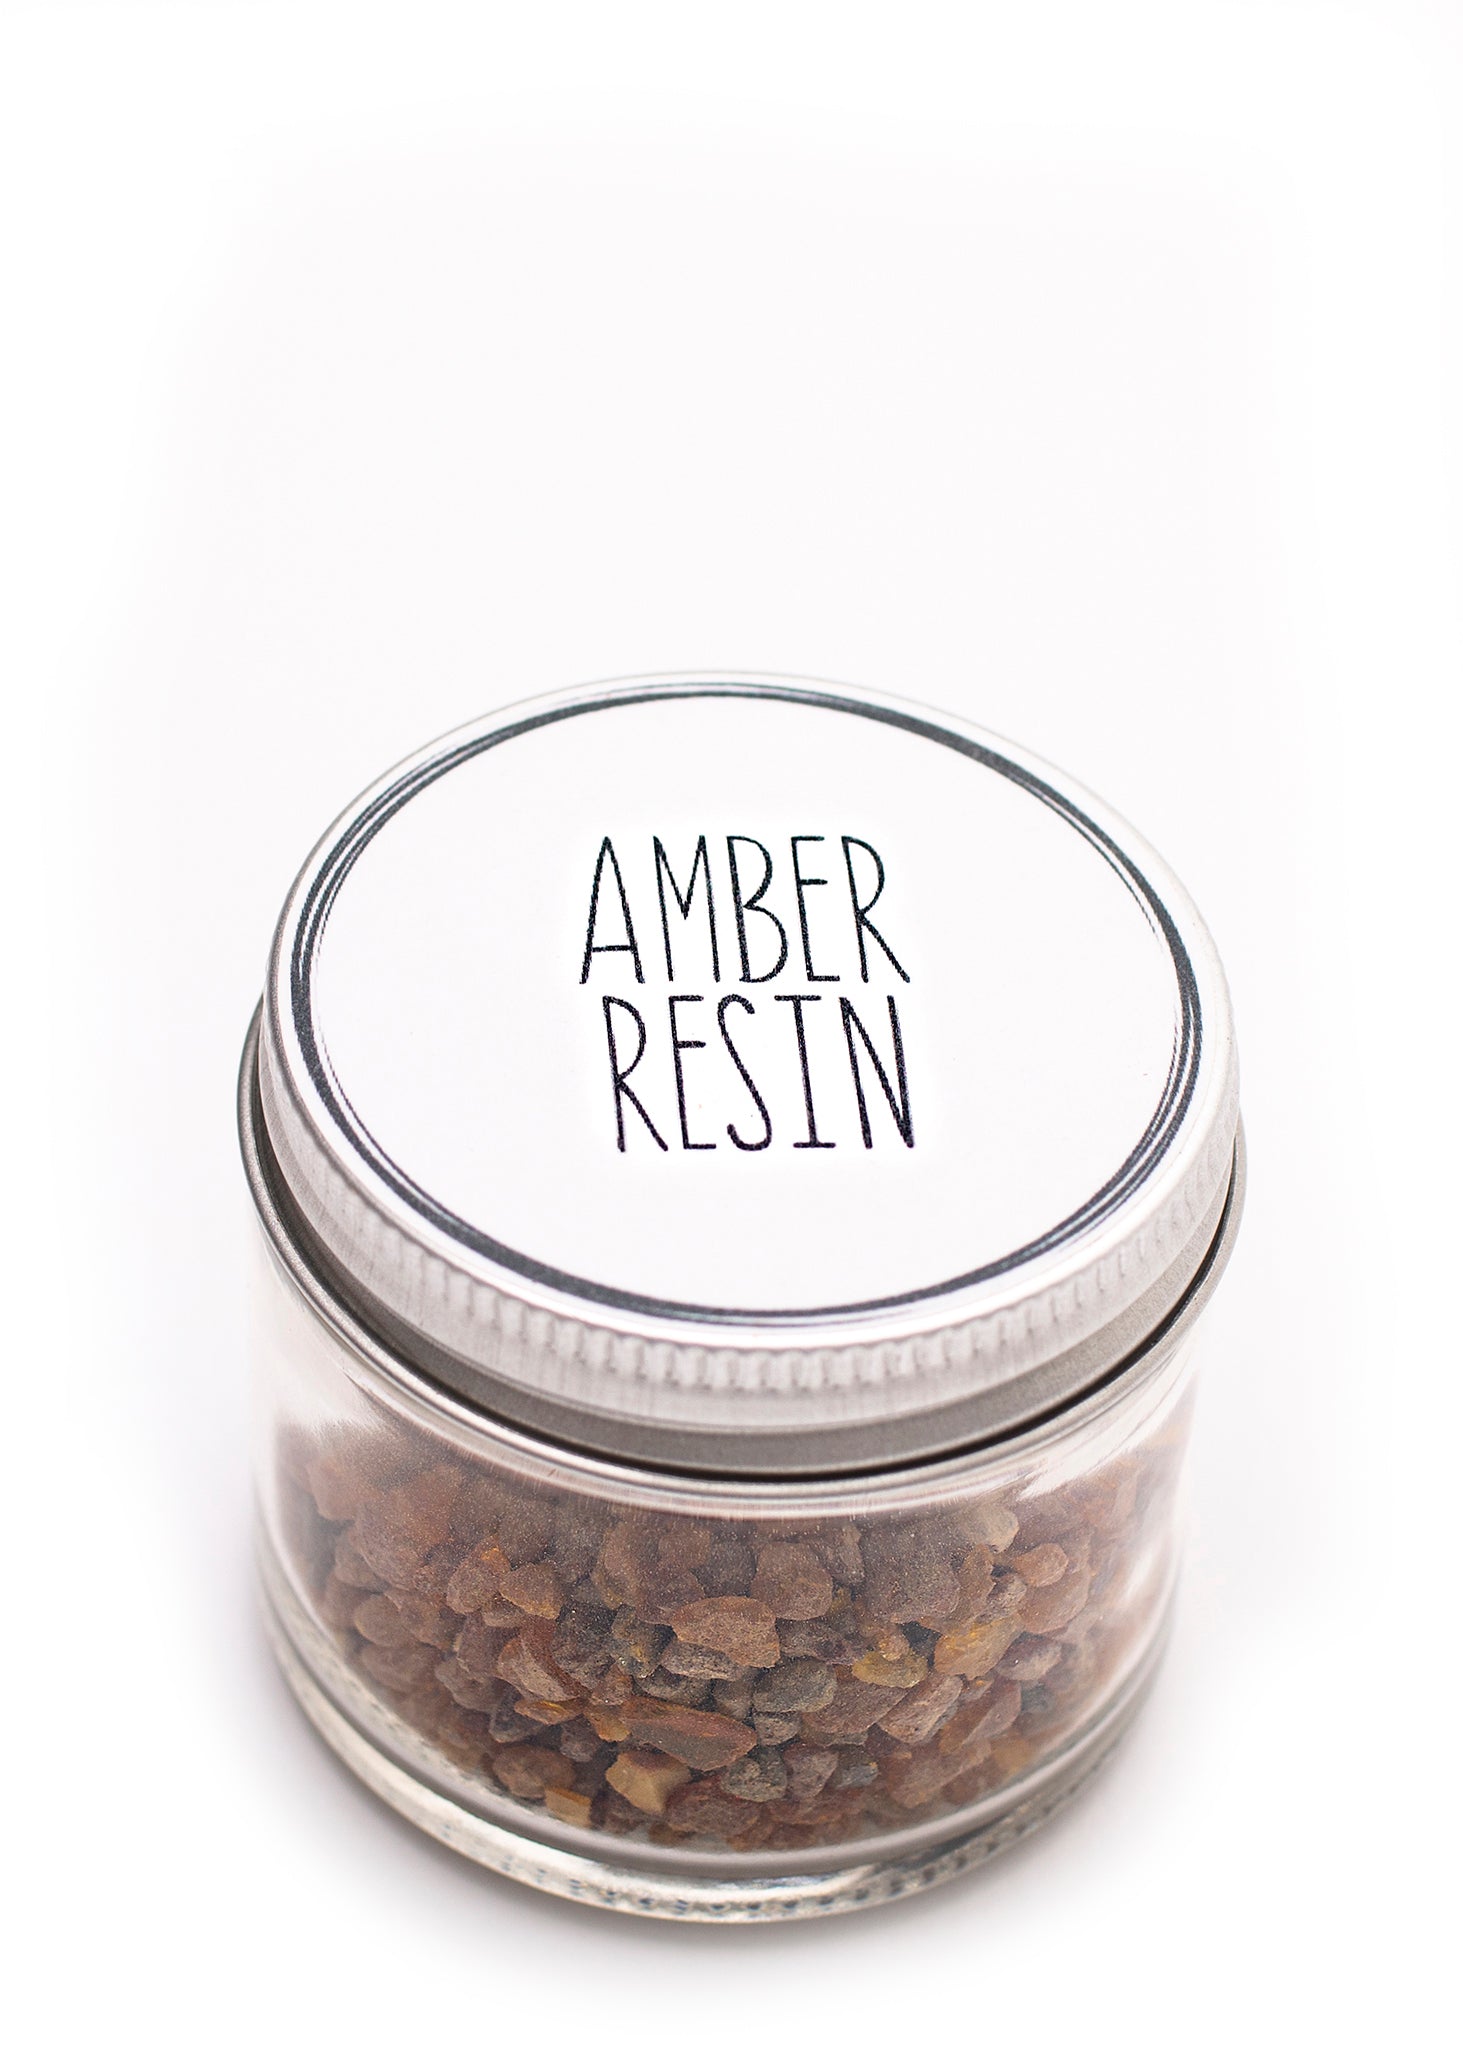 Amber Resin  Vital Living Herbs And Nutrition